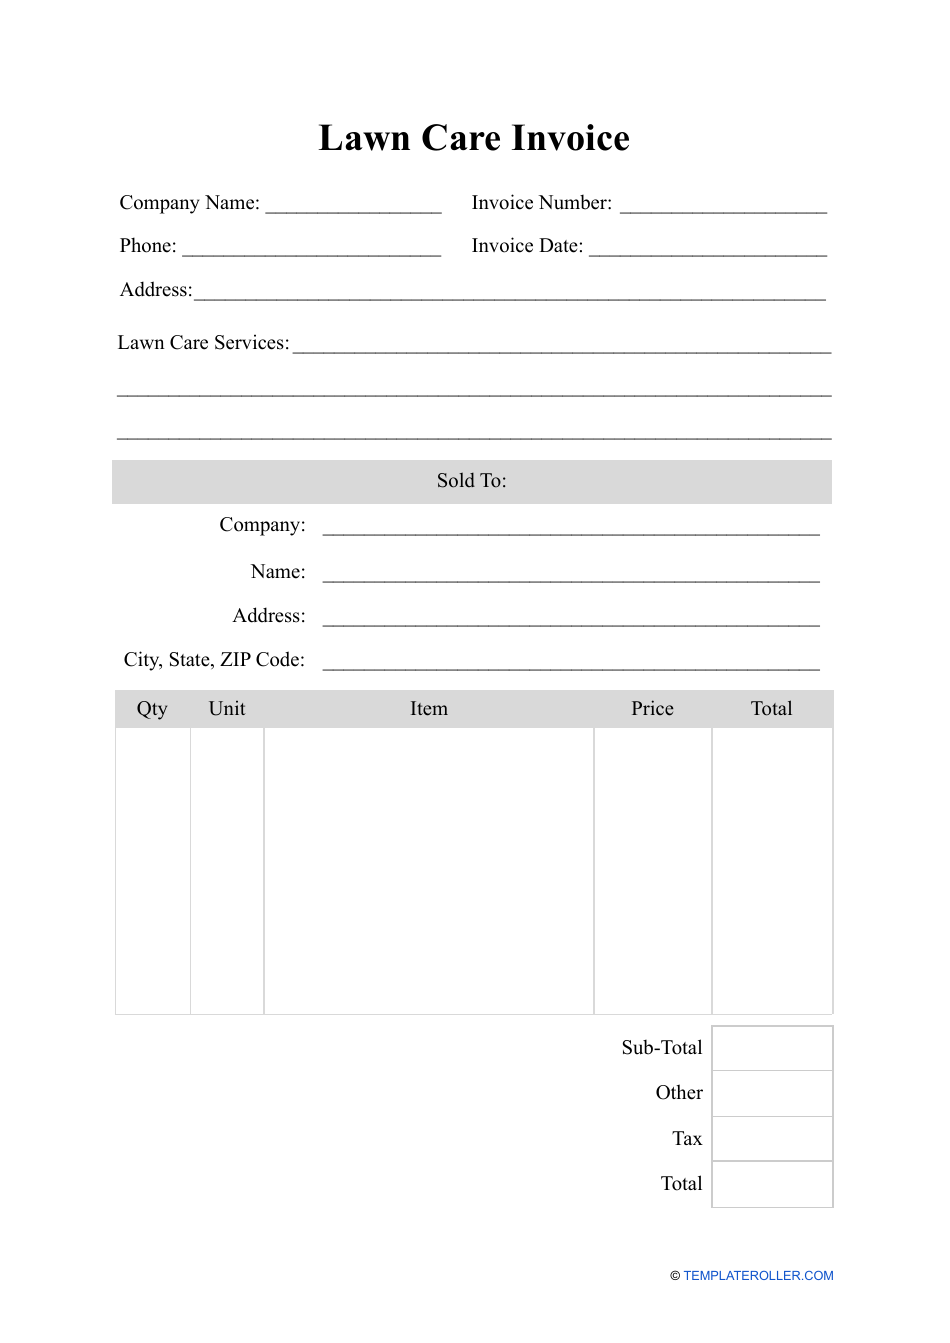 Lawn Care Invoice Template, Page 1